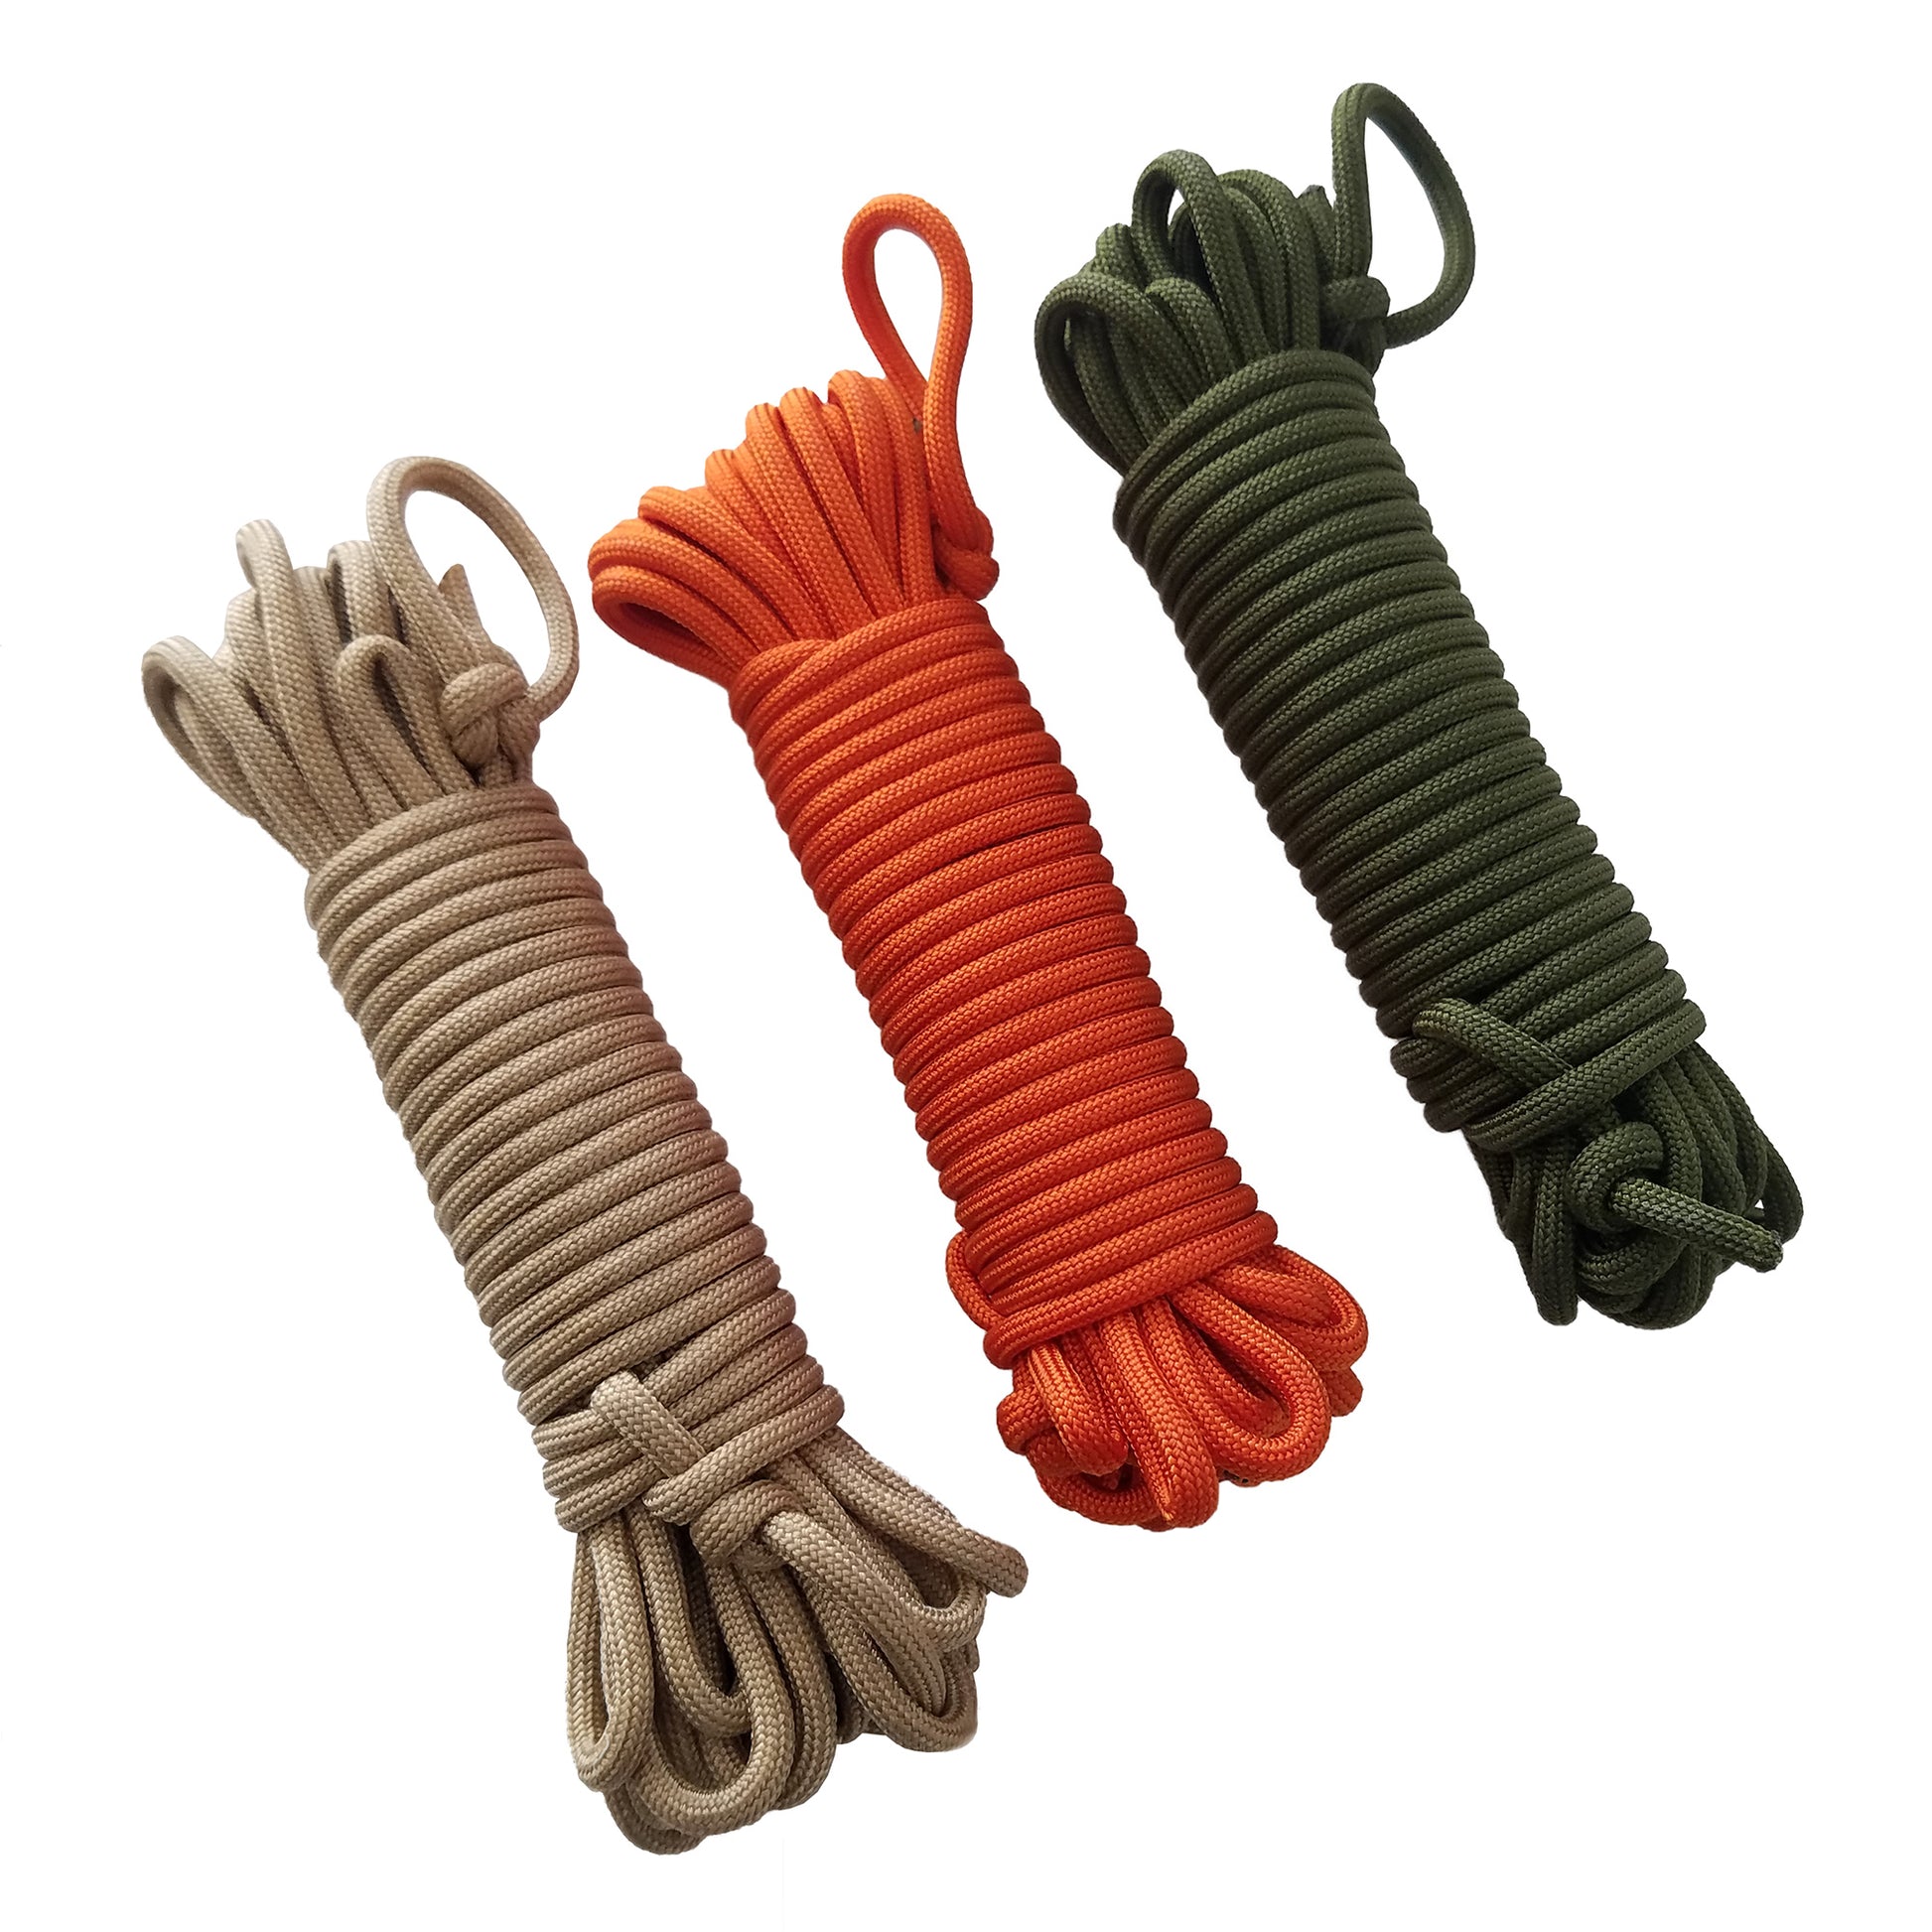 Mil-Spec Type III 550 Paracord - Pre-Wound 25-ft Quick Deploy